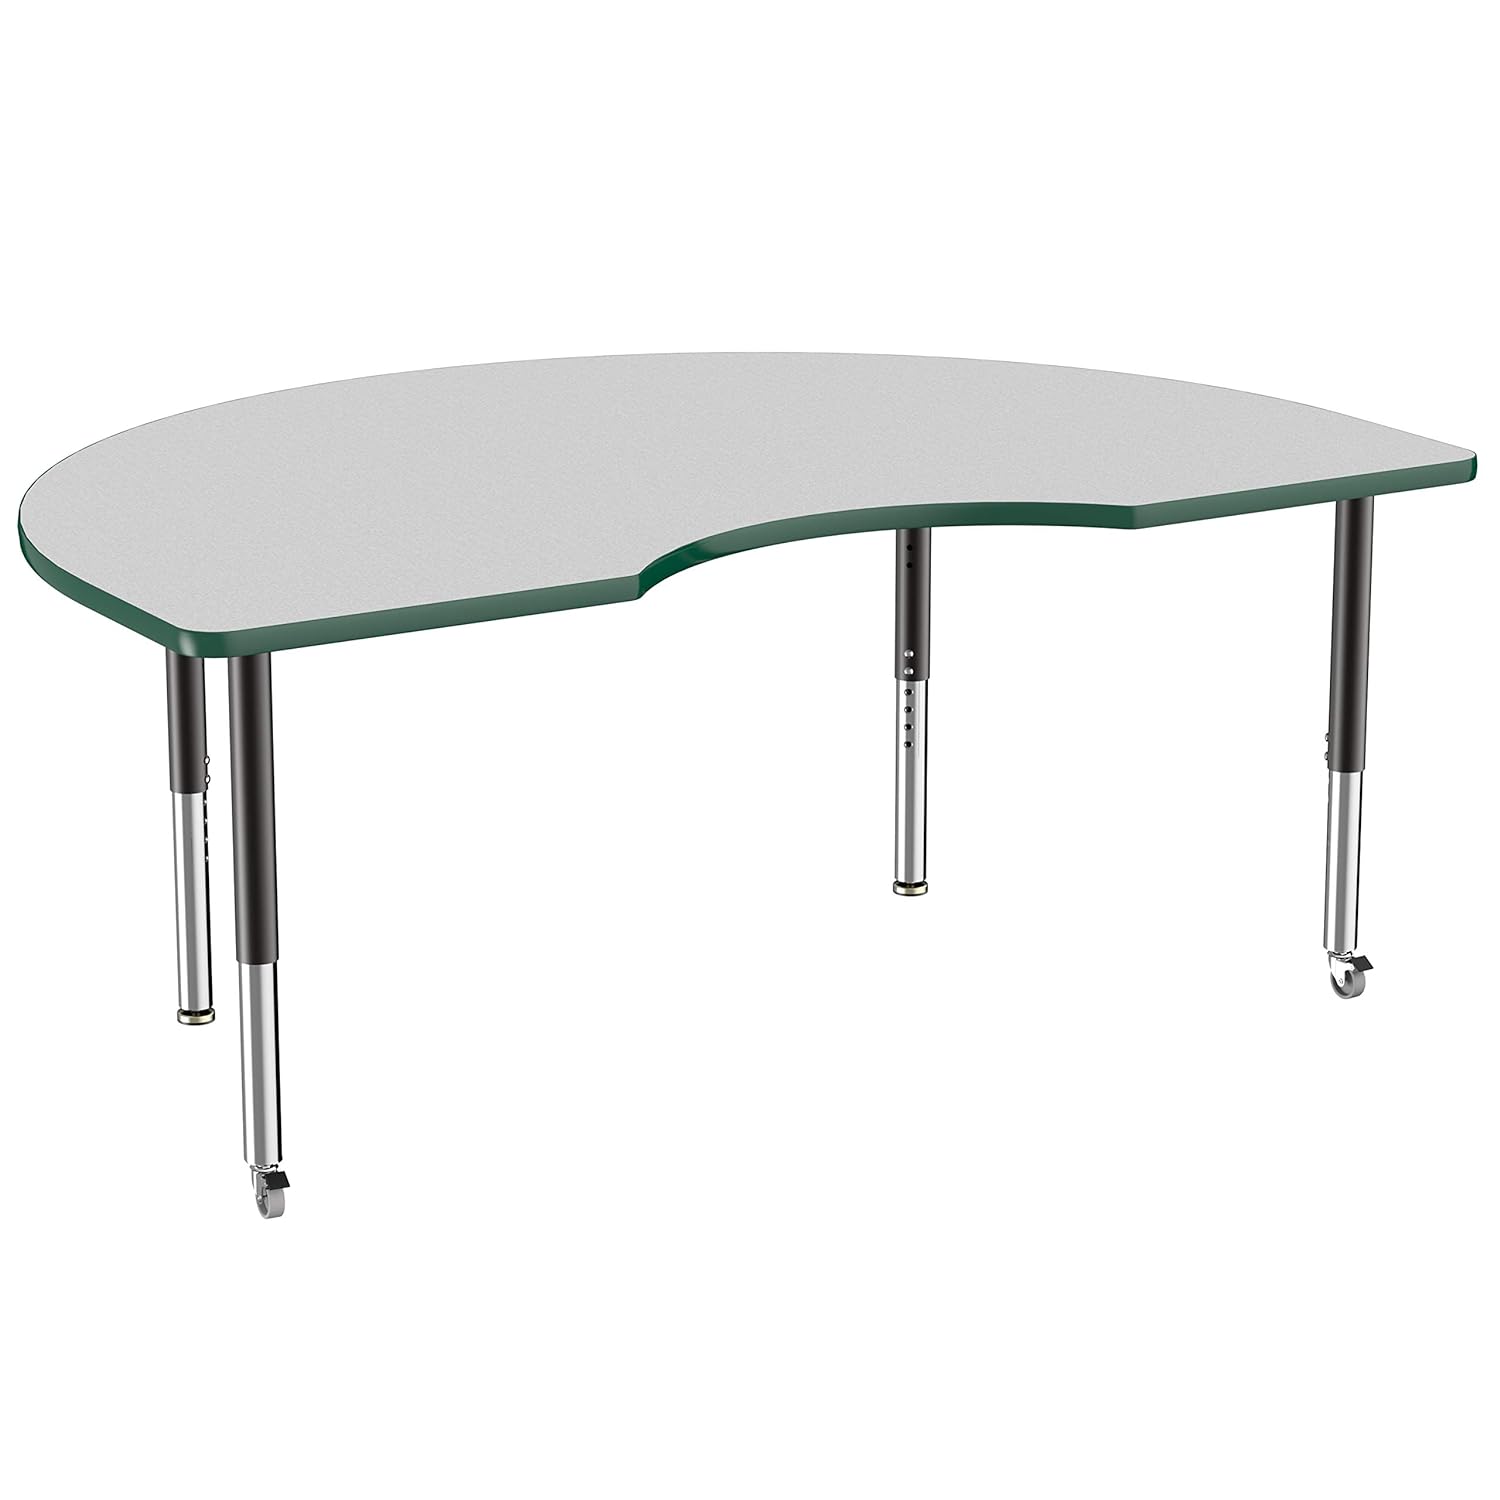 Factory Direct Partners 10087-GYGN Kidney Activity School and Office Table (48